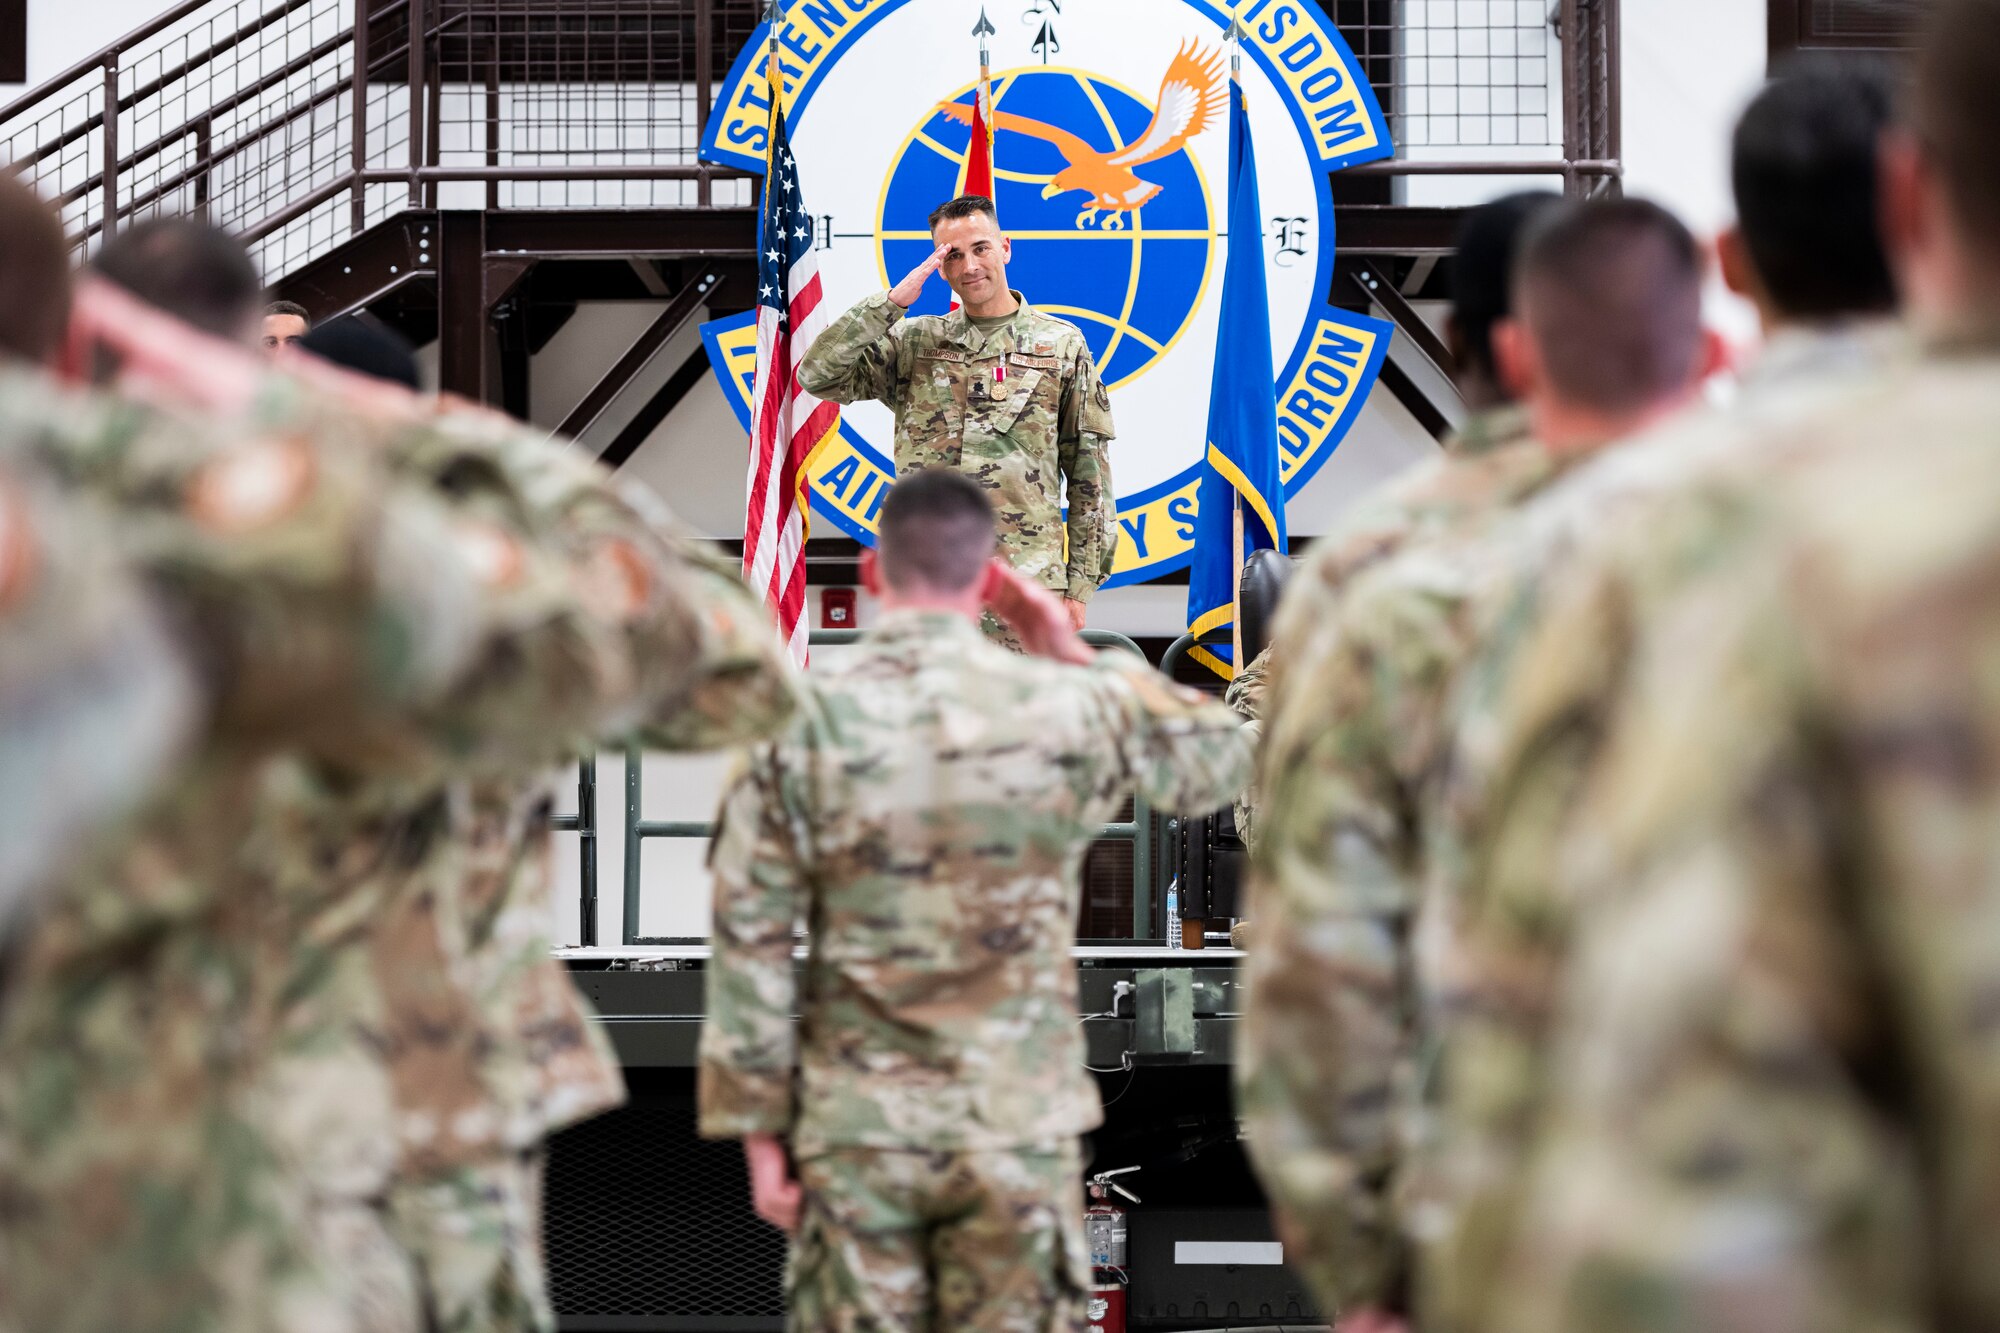 During the ceremony, Lt. Col. Jared Thompson relinquished command to Col. Dawson Brumbelow, 521st Air Mobility Operations Group commander, who then charged Lt. Col. Matthew Bryan with leading the squadron. The change of command ceremony is a long-standing military tradition that represents the formal transfer of responsibility from one officer to another.